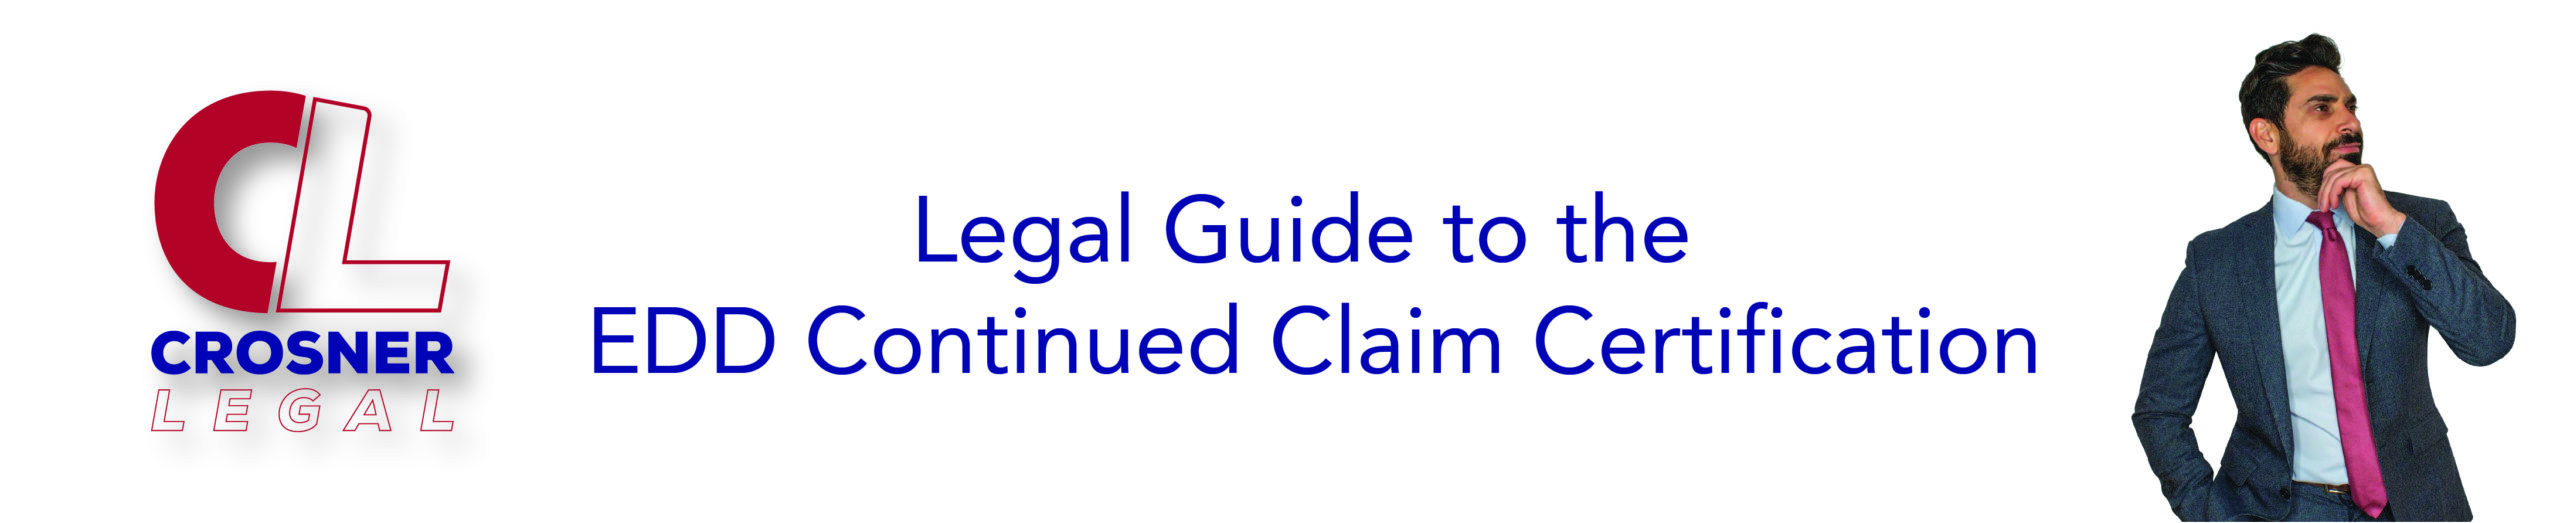 Legal Guide to the EDD Continued Claim Certification